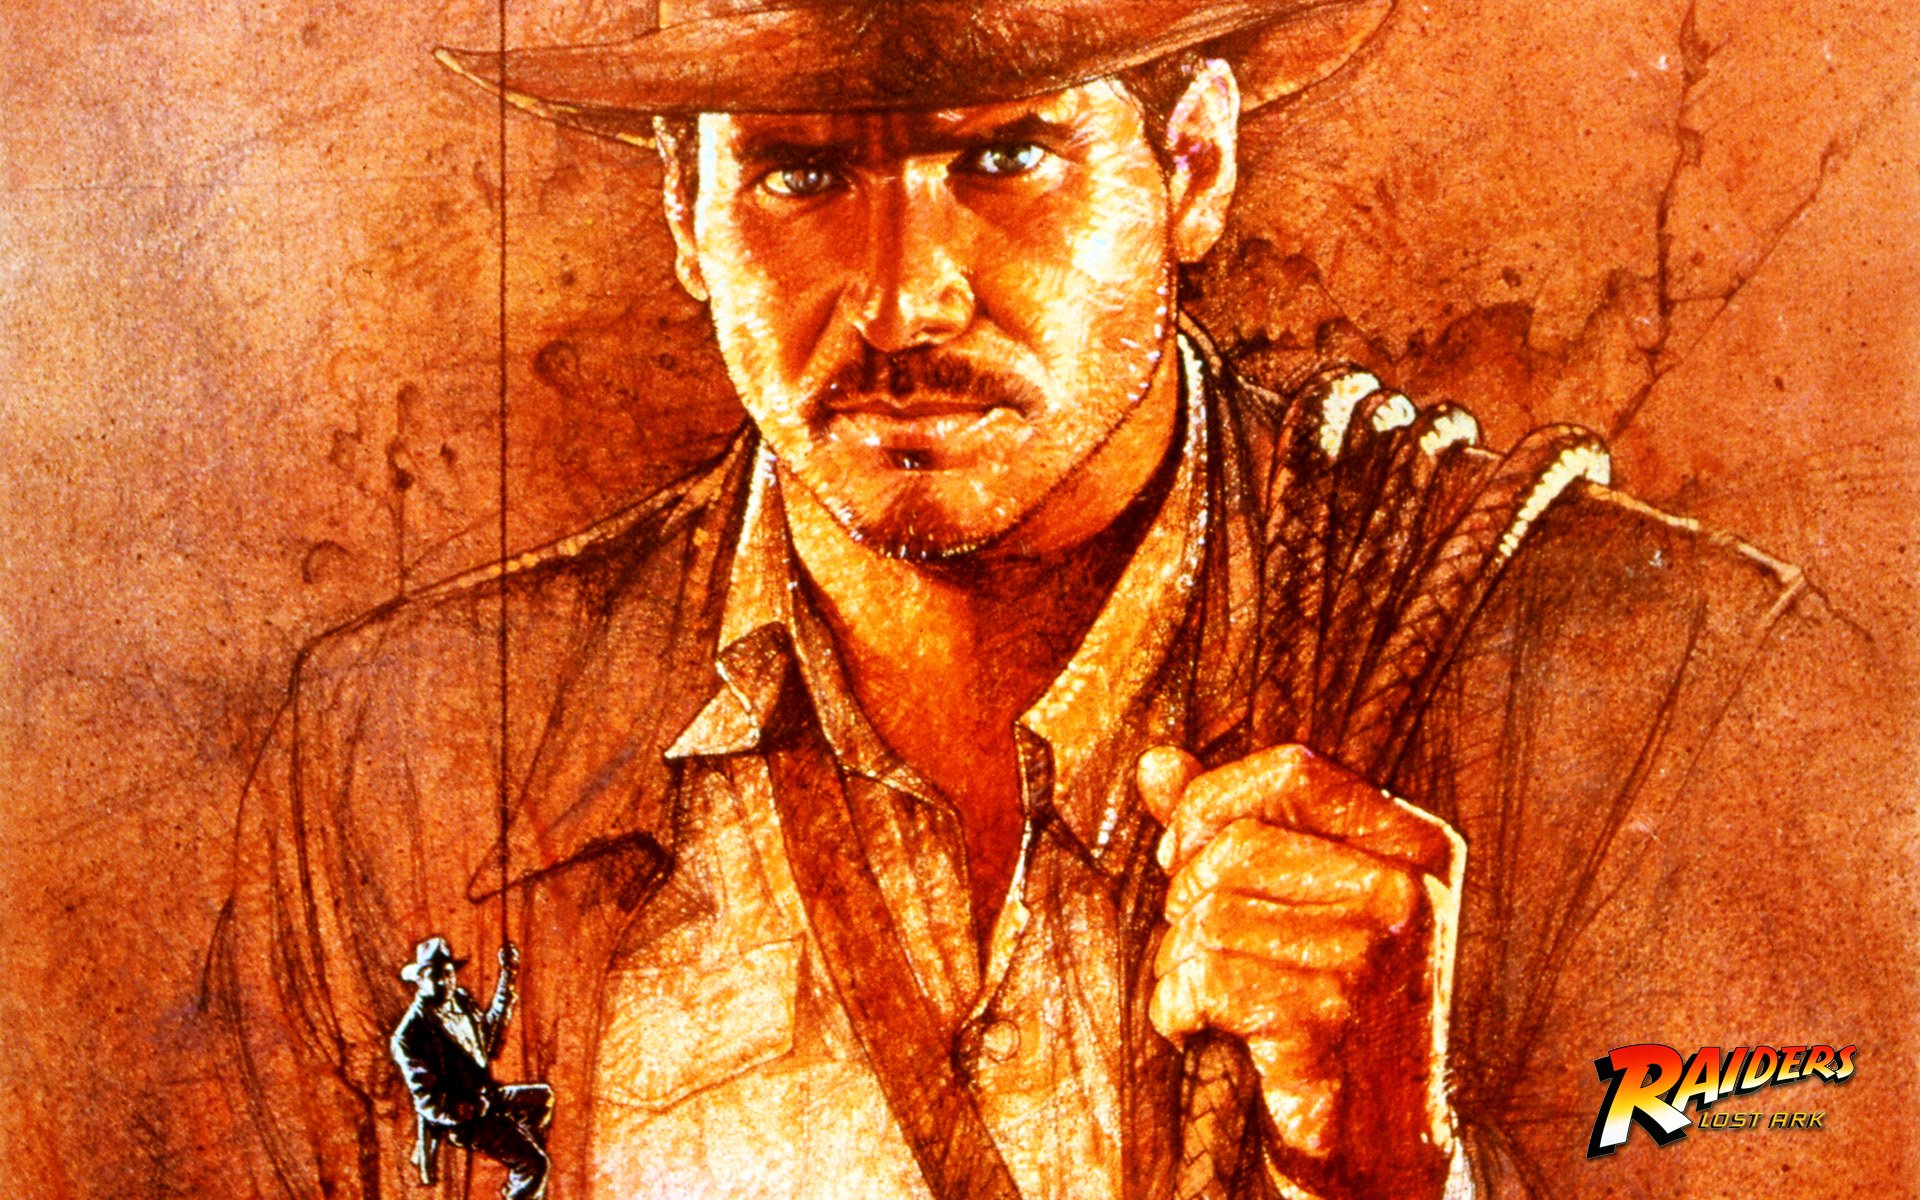 Raiders Of The Lost Ark HD Wallpaper, Background Image